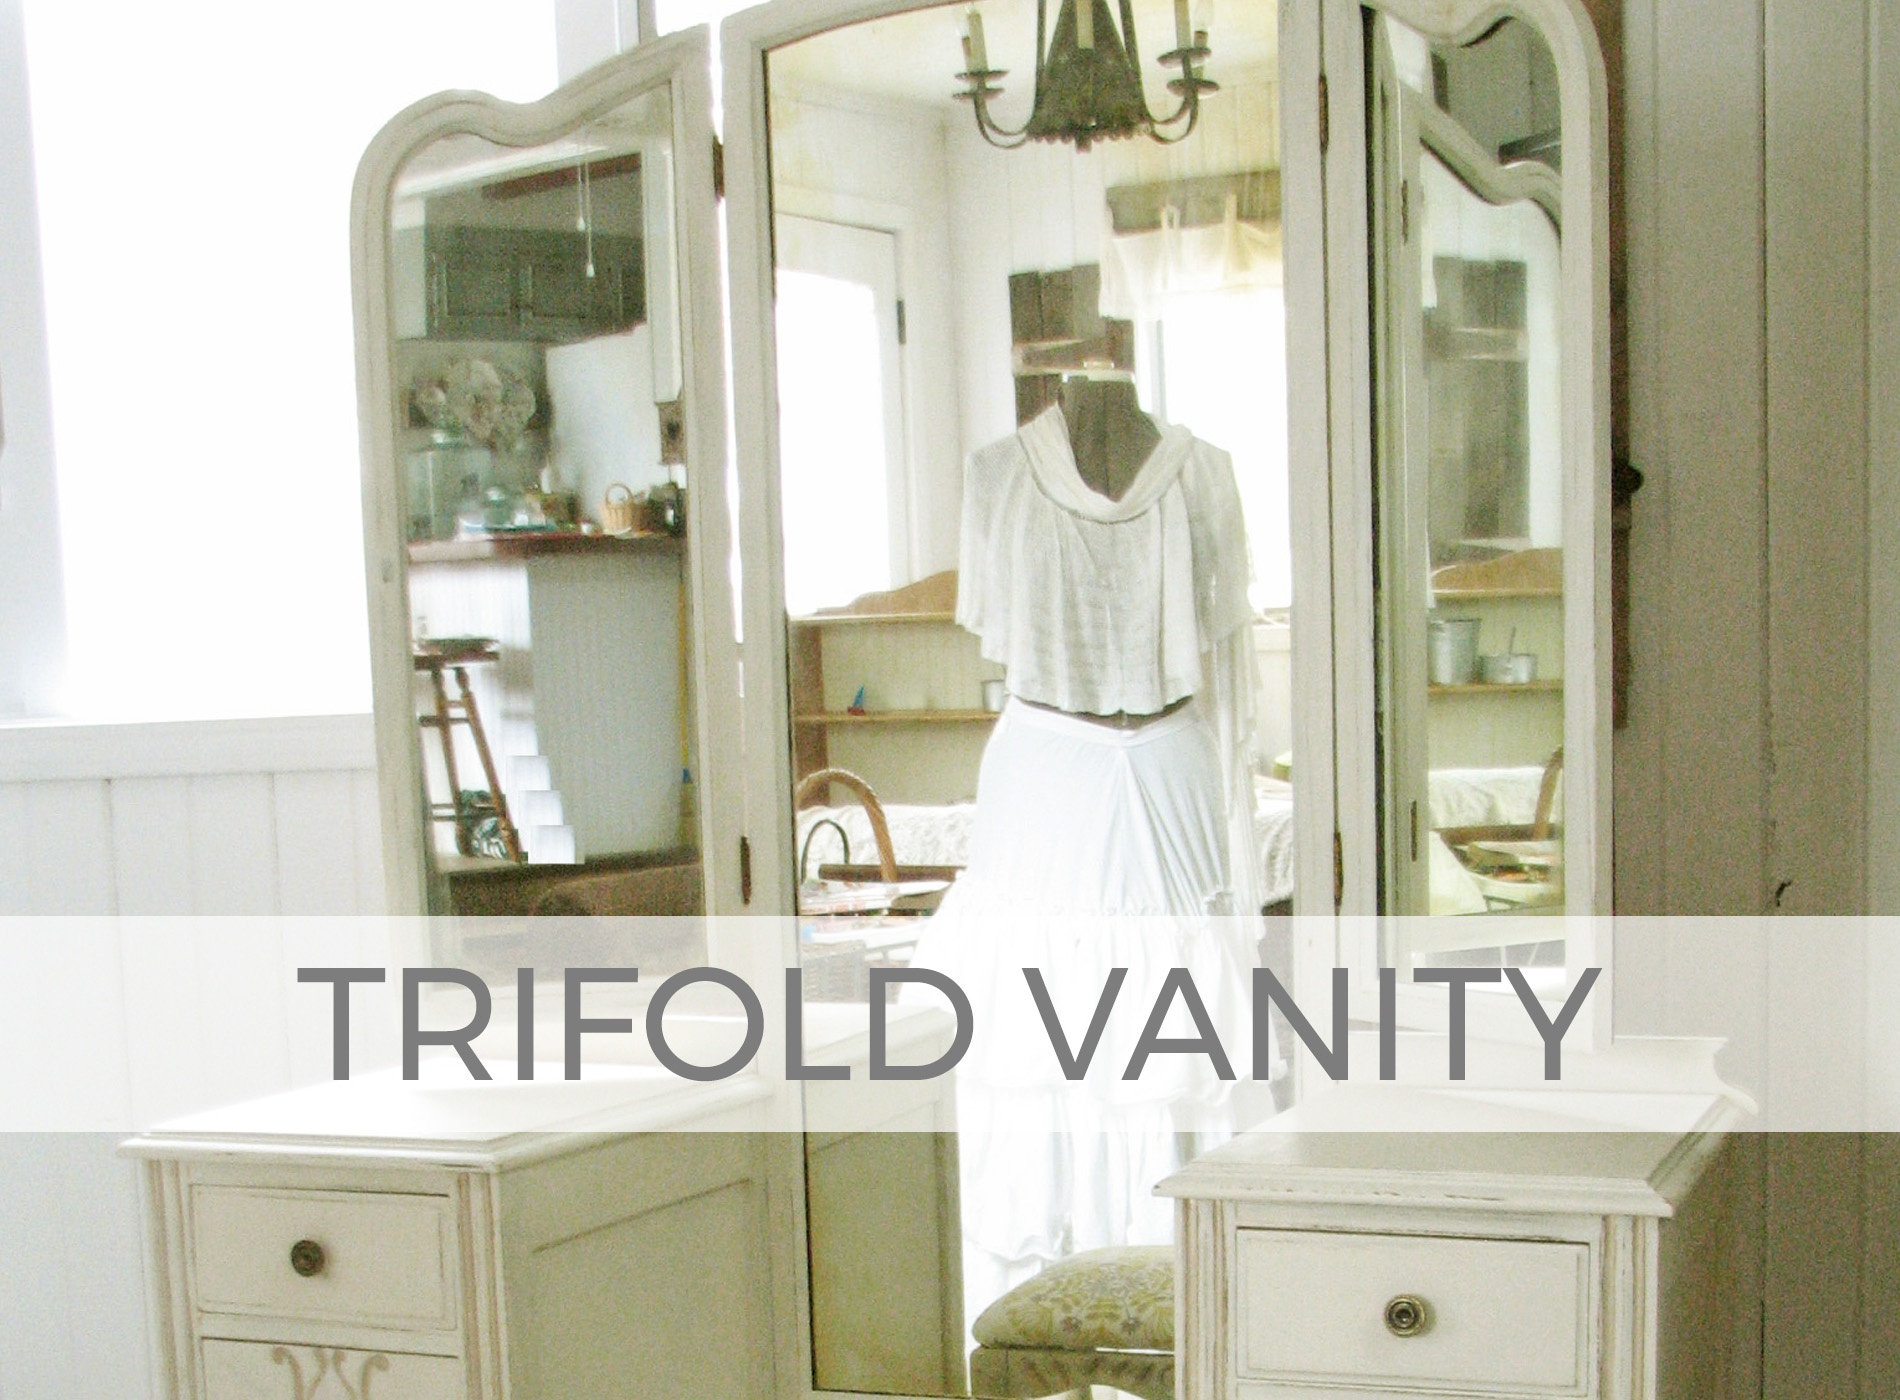 Antique Vanity Dressing Table with Trifold Mirror by Larissa of Prodigal Pieces | prodigalpieces.com #prodigalpieces #furniture #home #diy #homedecor